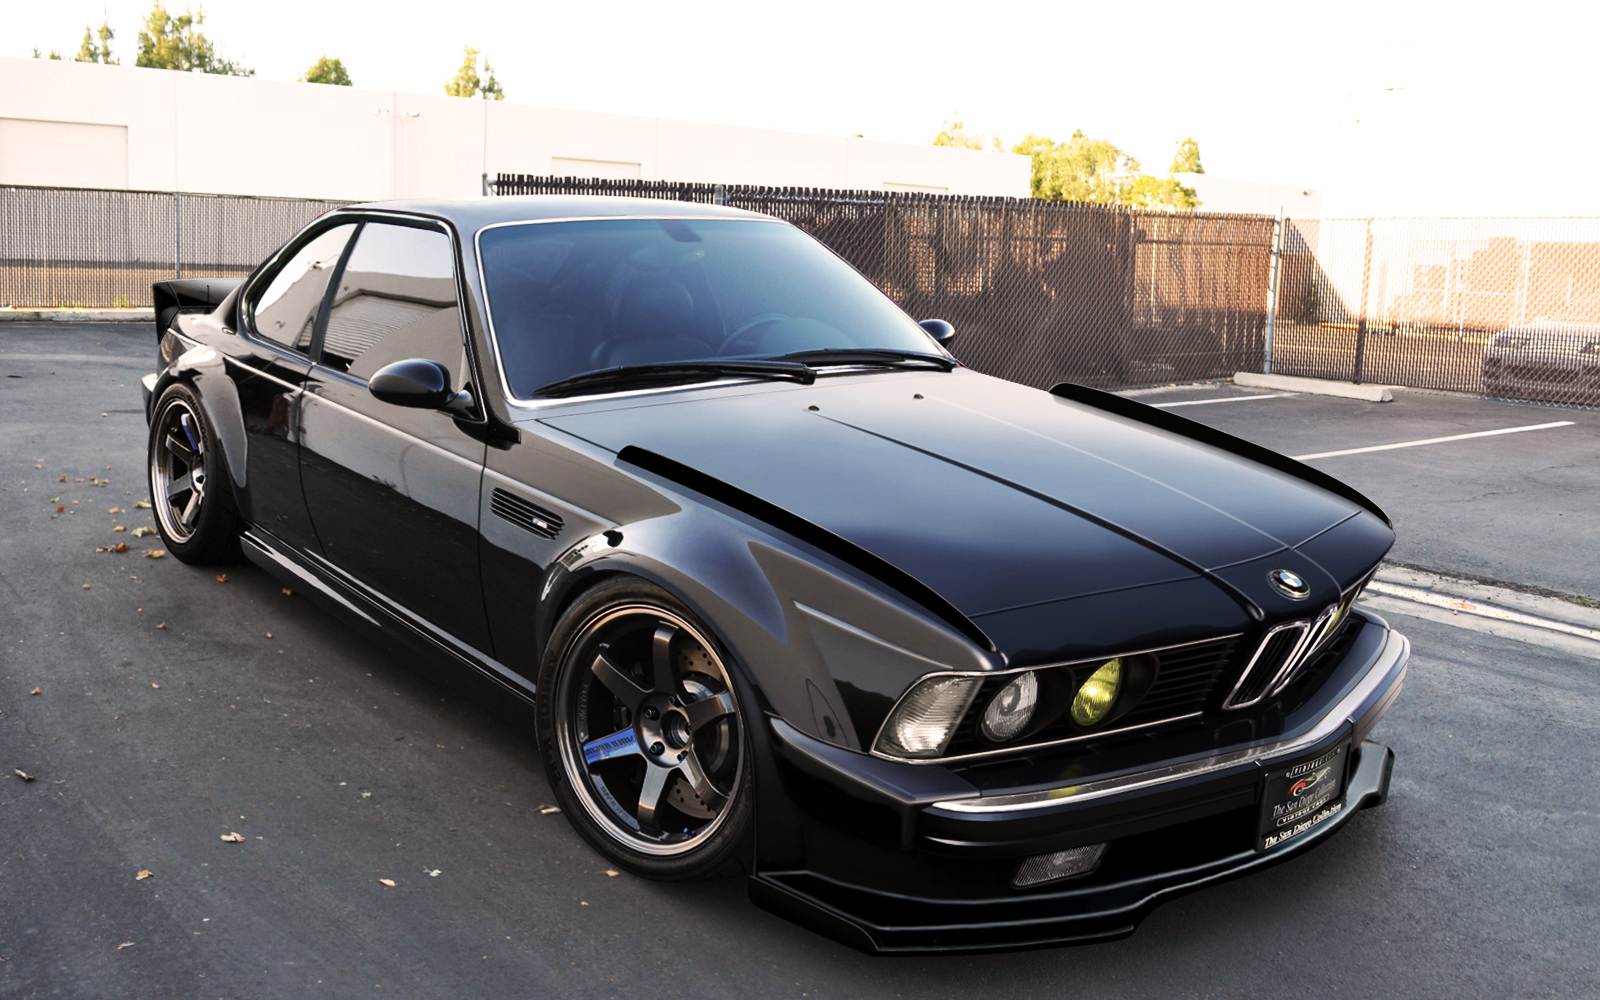 bmw m6 by roof01 on deviantart